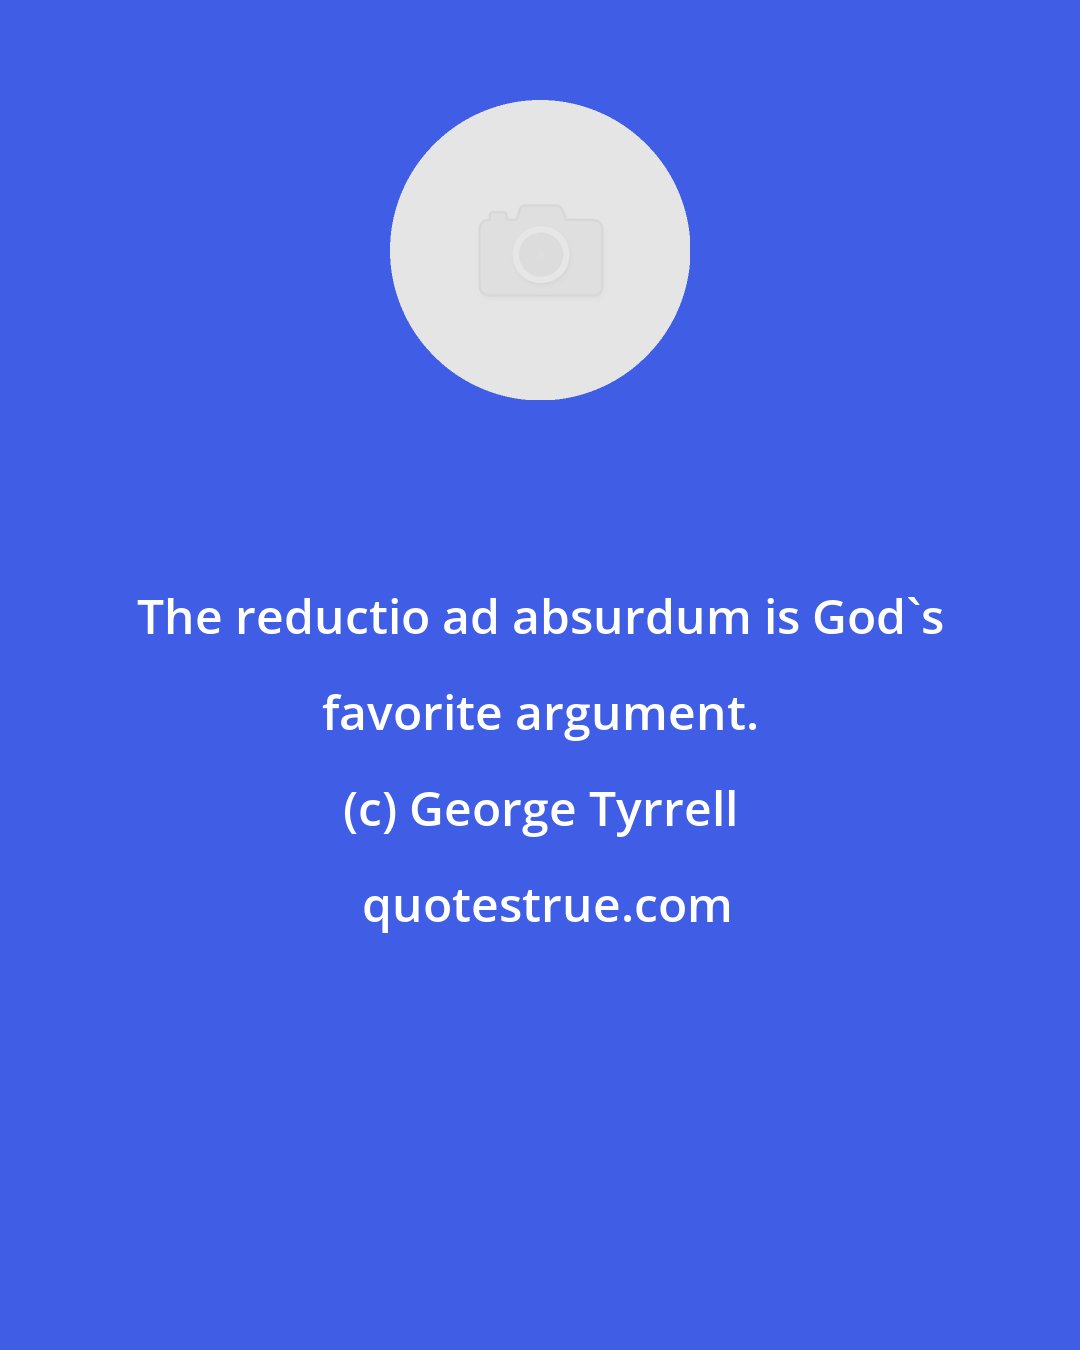 George Tyrrell: The reductio ad absurdum is God's favorite argument.